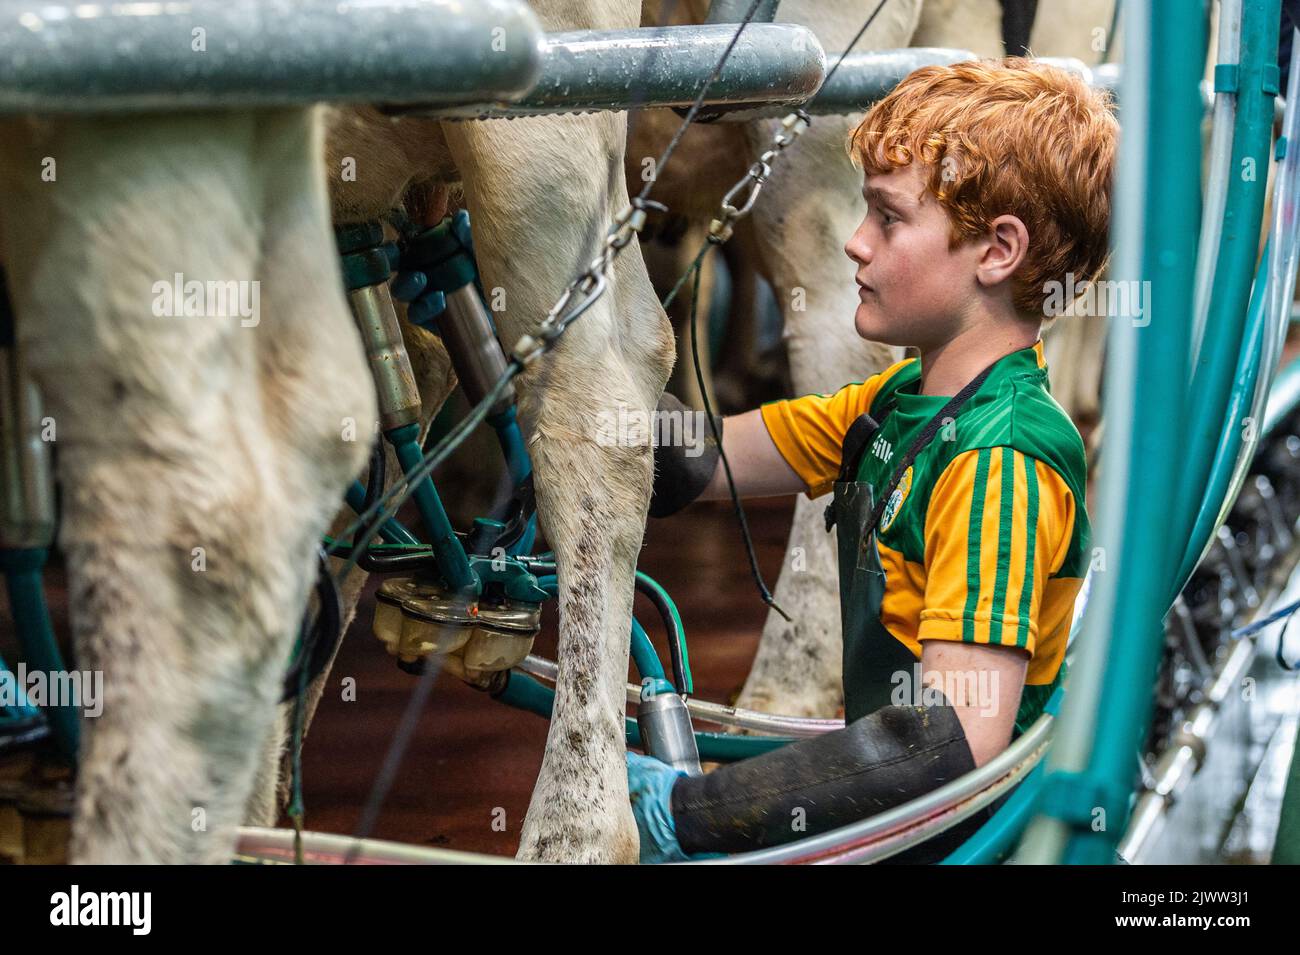 Farming: Timoleague, West Cork, Ireland. 6th Sept, 2022. The 160 strong herd of dairy farmer DJ Keohane are milked at his farm in Timoleague, West Cork. DJ's son, Daniel aged 11 and daughter Clíodhna, 15 help with the milking. The parlour holds 20 cows each side and milking is completed within an hour. DJ is currently yielding approx. 20 litres per cow. Credit: AG News/Alamy Live News Stock Photo